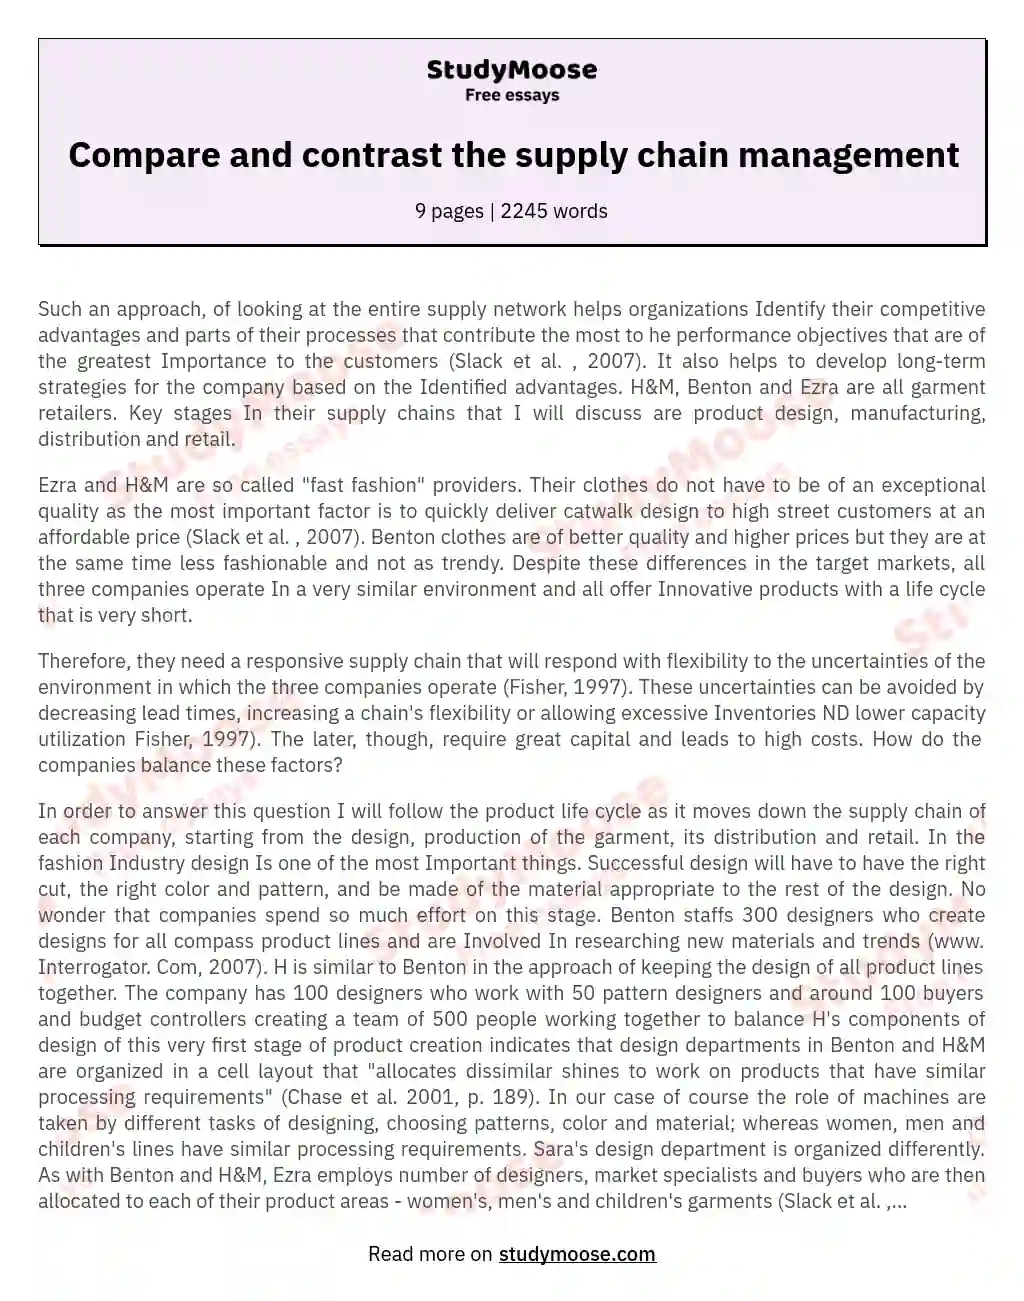 Compare and contrast the supply chain management essay